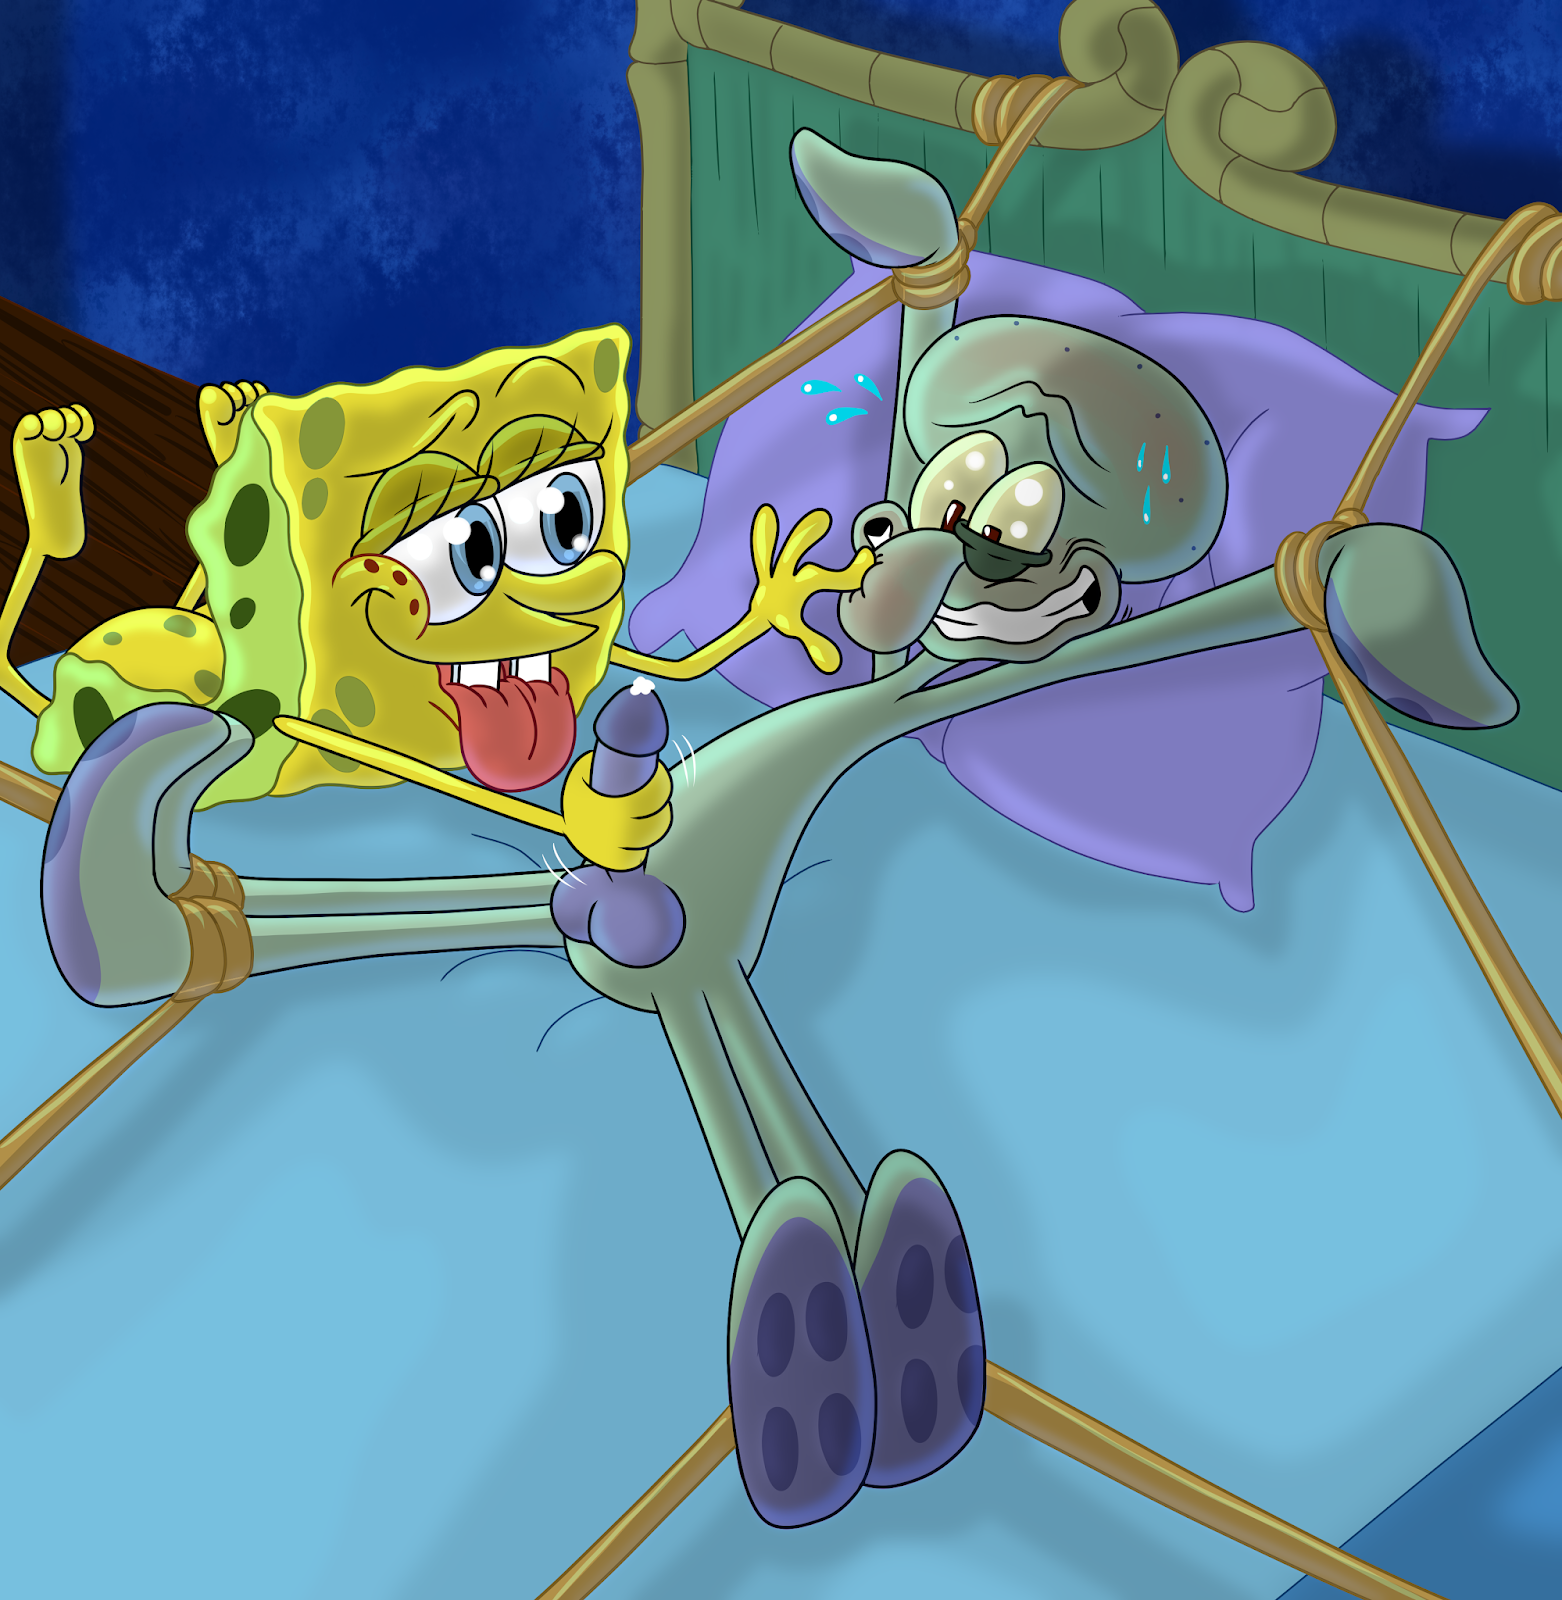 It was the only way to get Squidward to agree! 